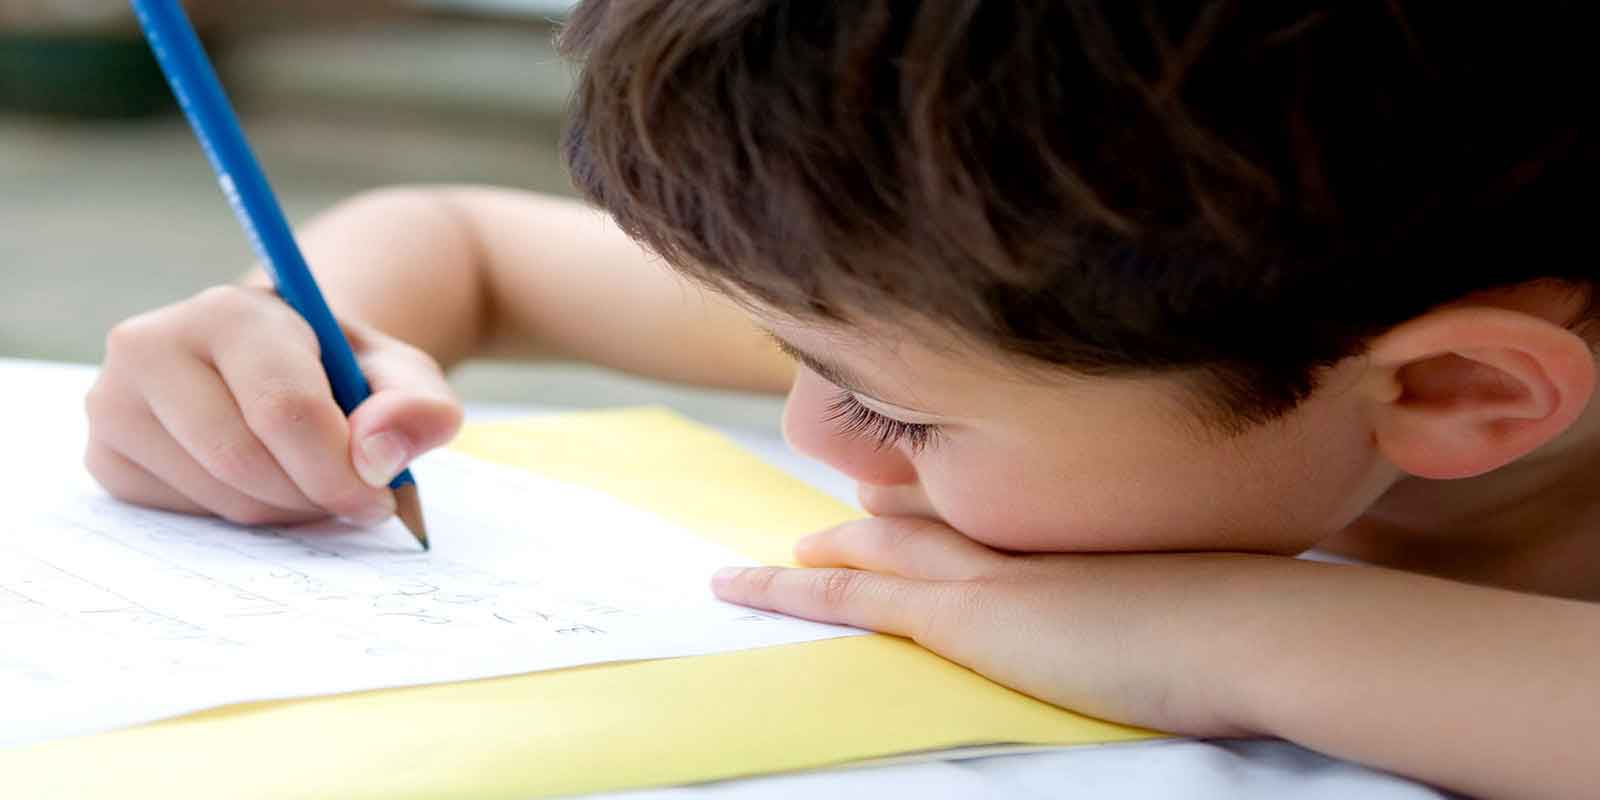 A child using a pen and paper to refine his motor skills